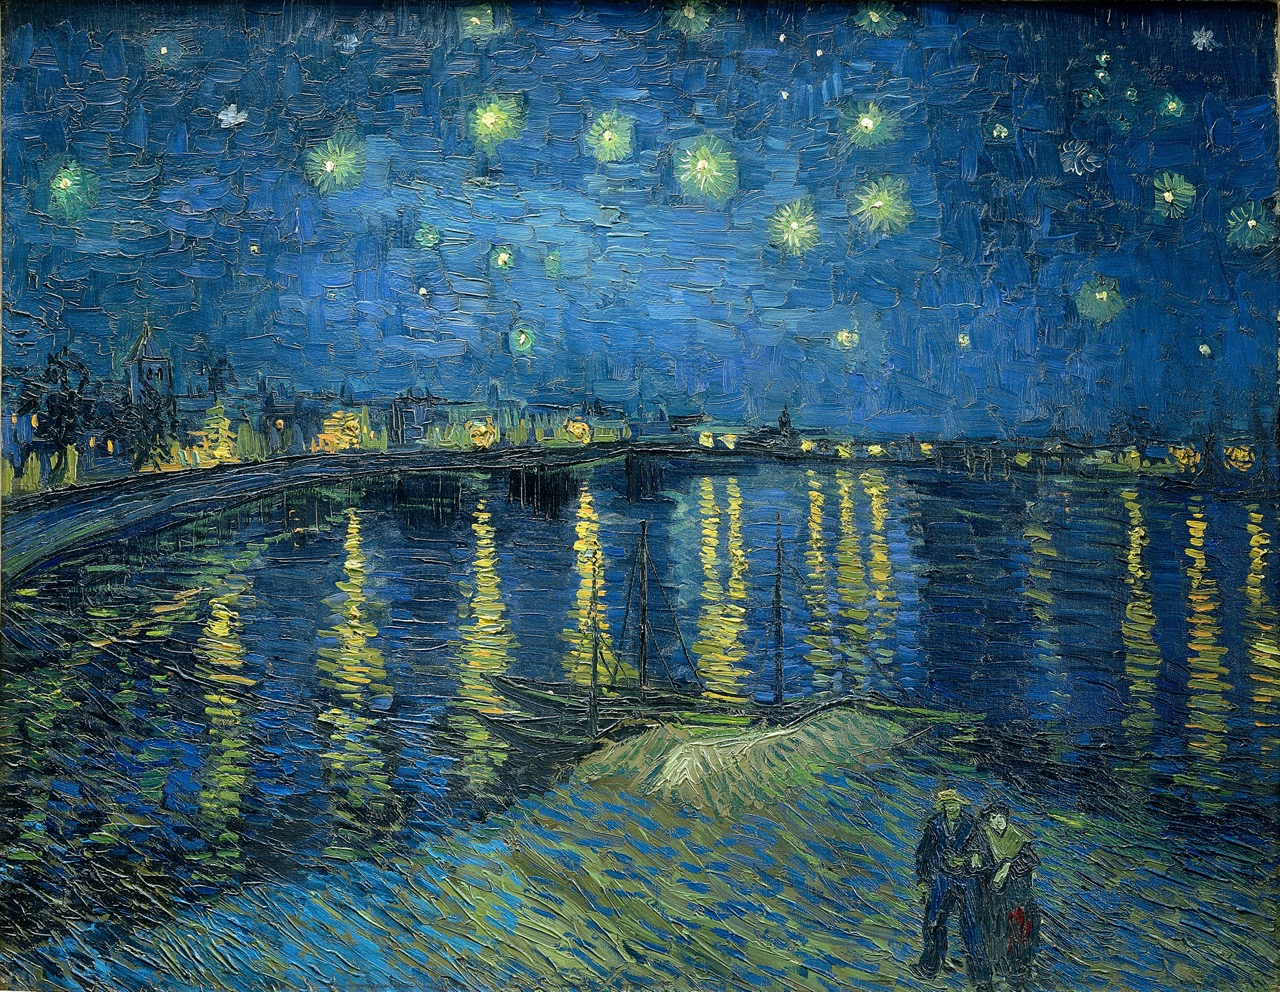 oil painting of a river at night with stars and lanterns of a distant bridge reflected in the water